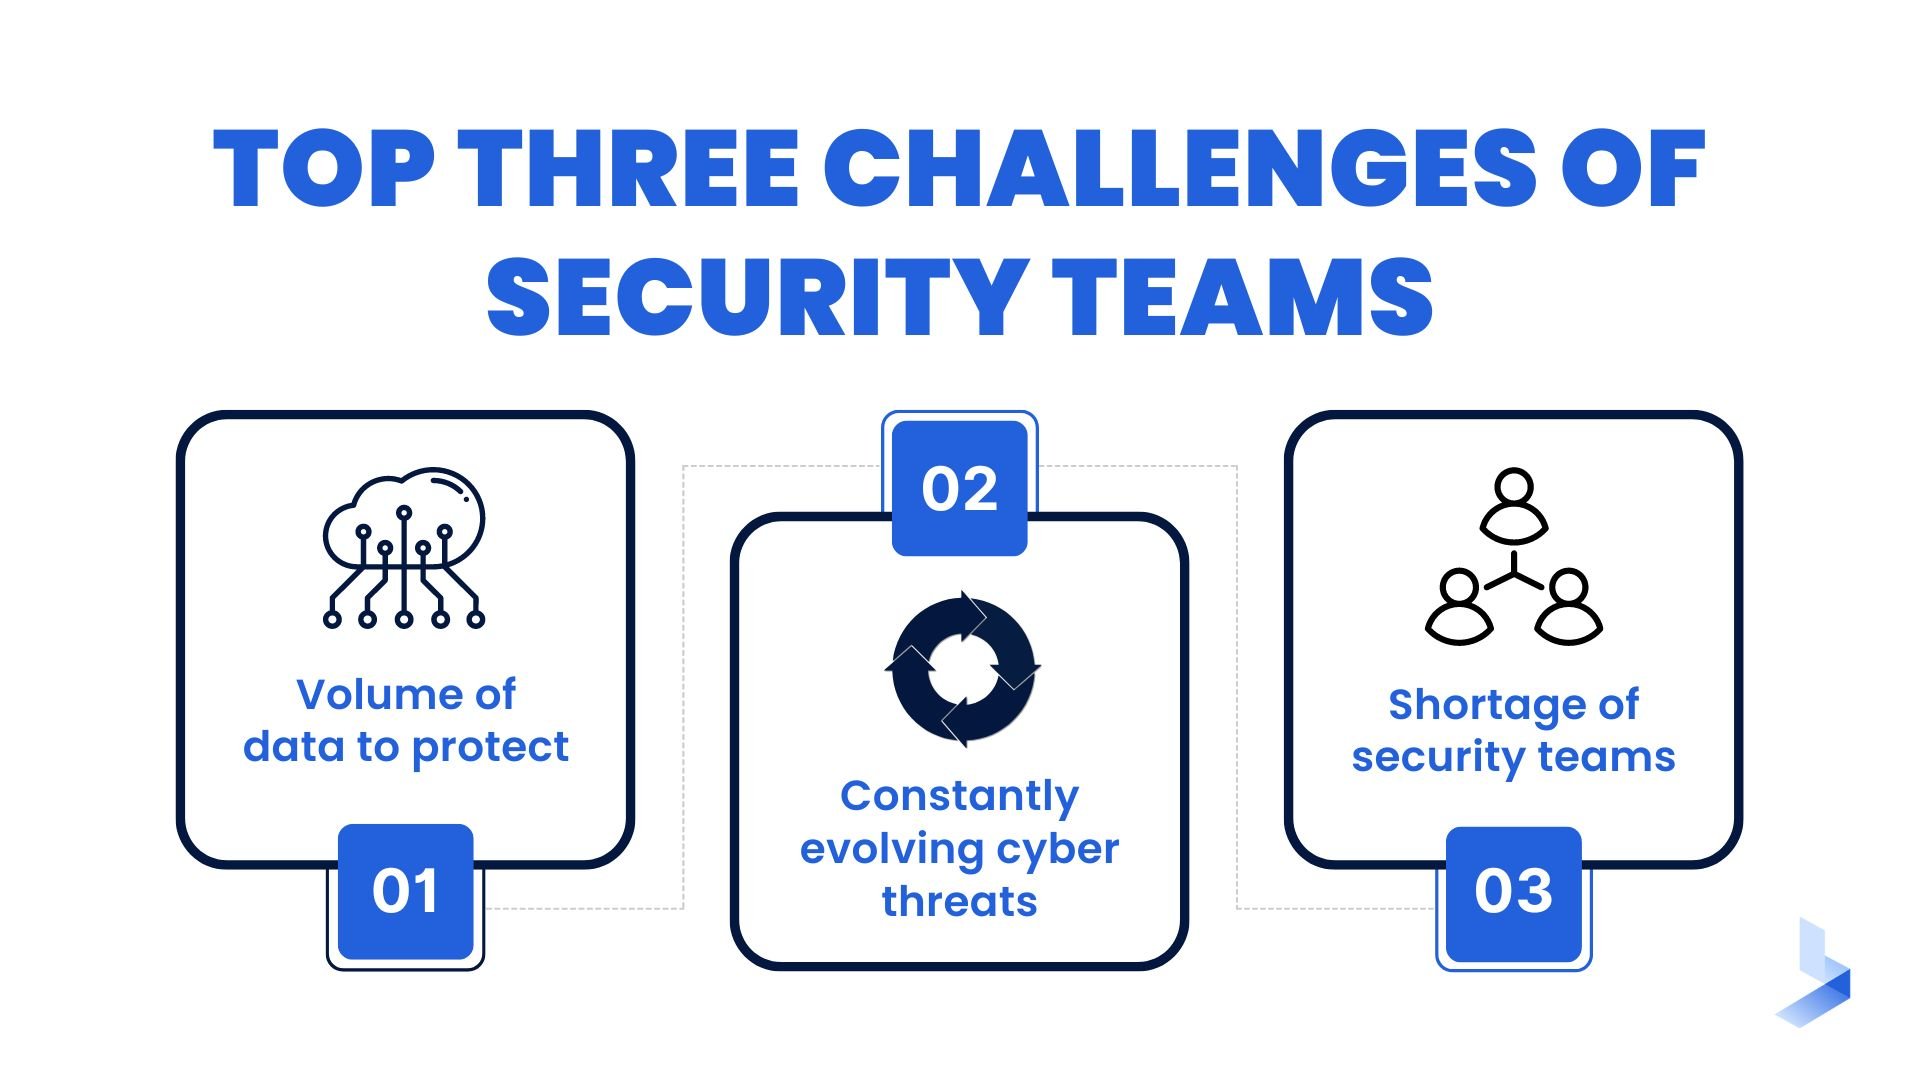 Top three challenges of security teams